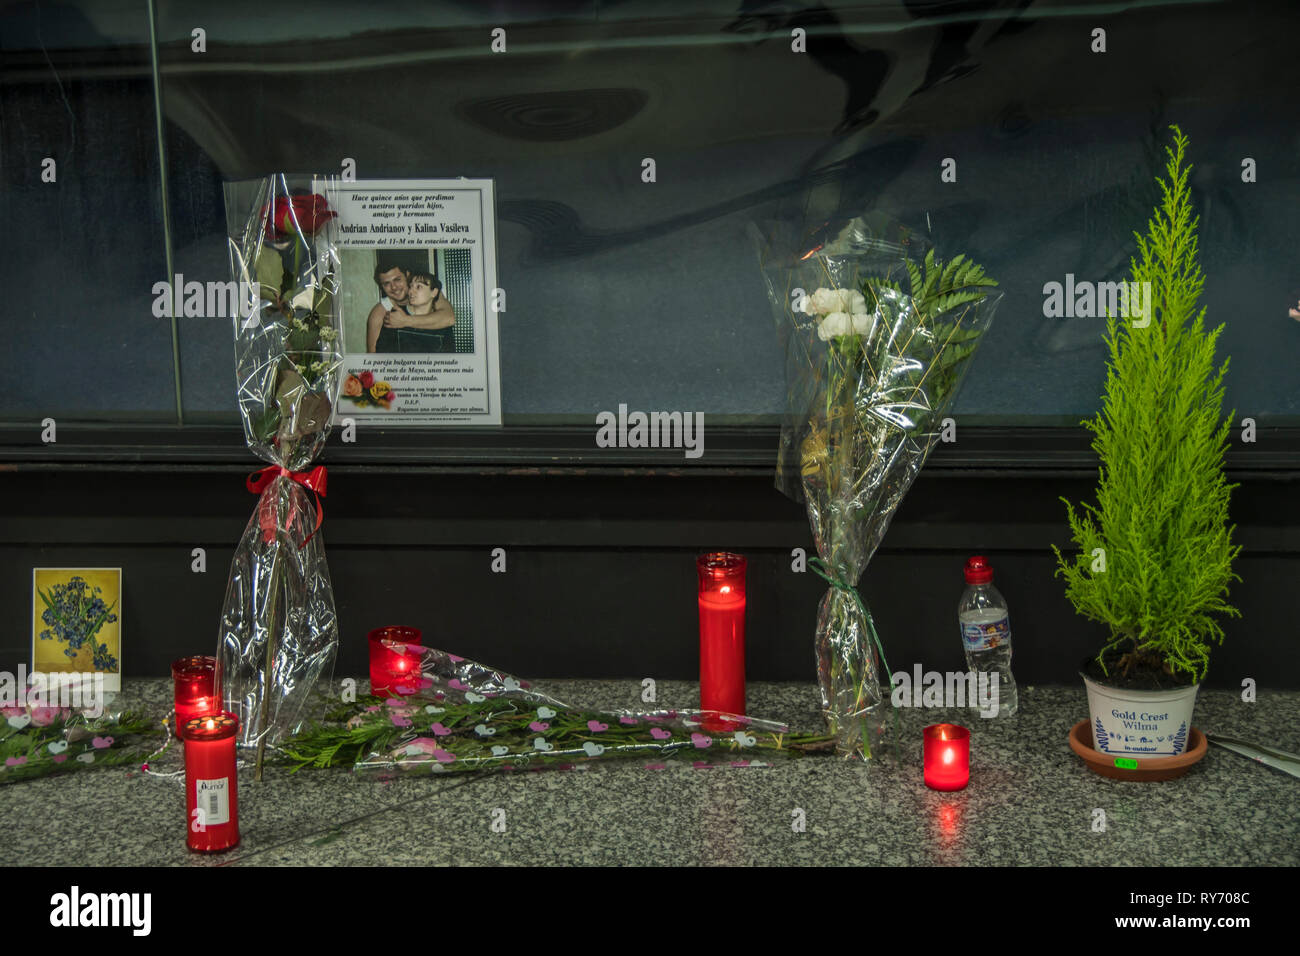 A portrait of Andrian Andrianov and Kalina Vasileva a Bulgarian couple who had planned to marry in the month of May, a few months after the attack, are buried with bridal attire in the same grave in Torrejon de Ardoz. Homage to the victims of 11 terrorism attack 2004 at the atocha train station in Madrid, Spain. Stock Photo